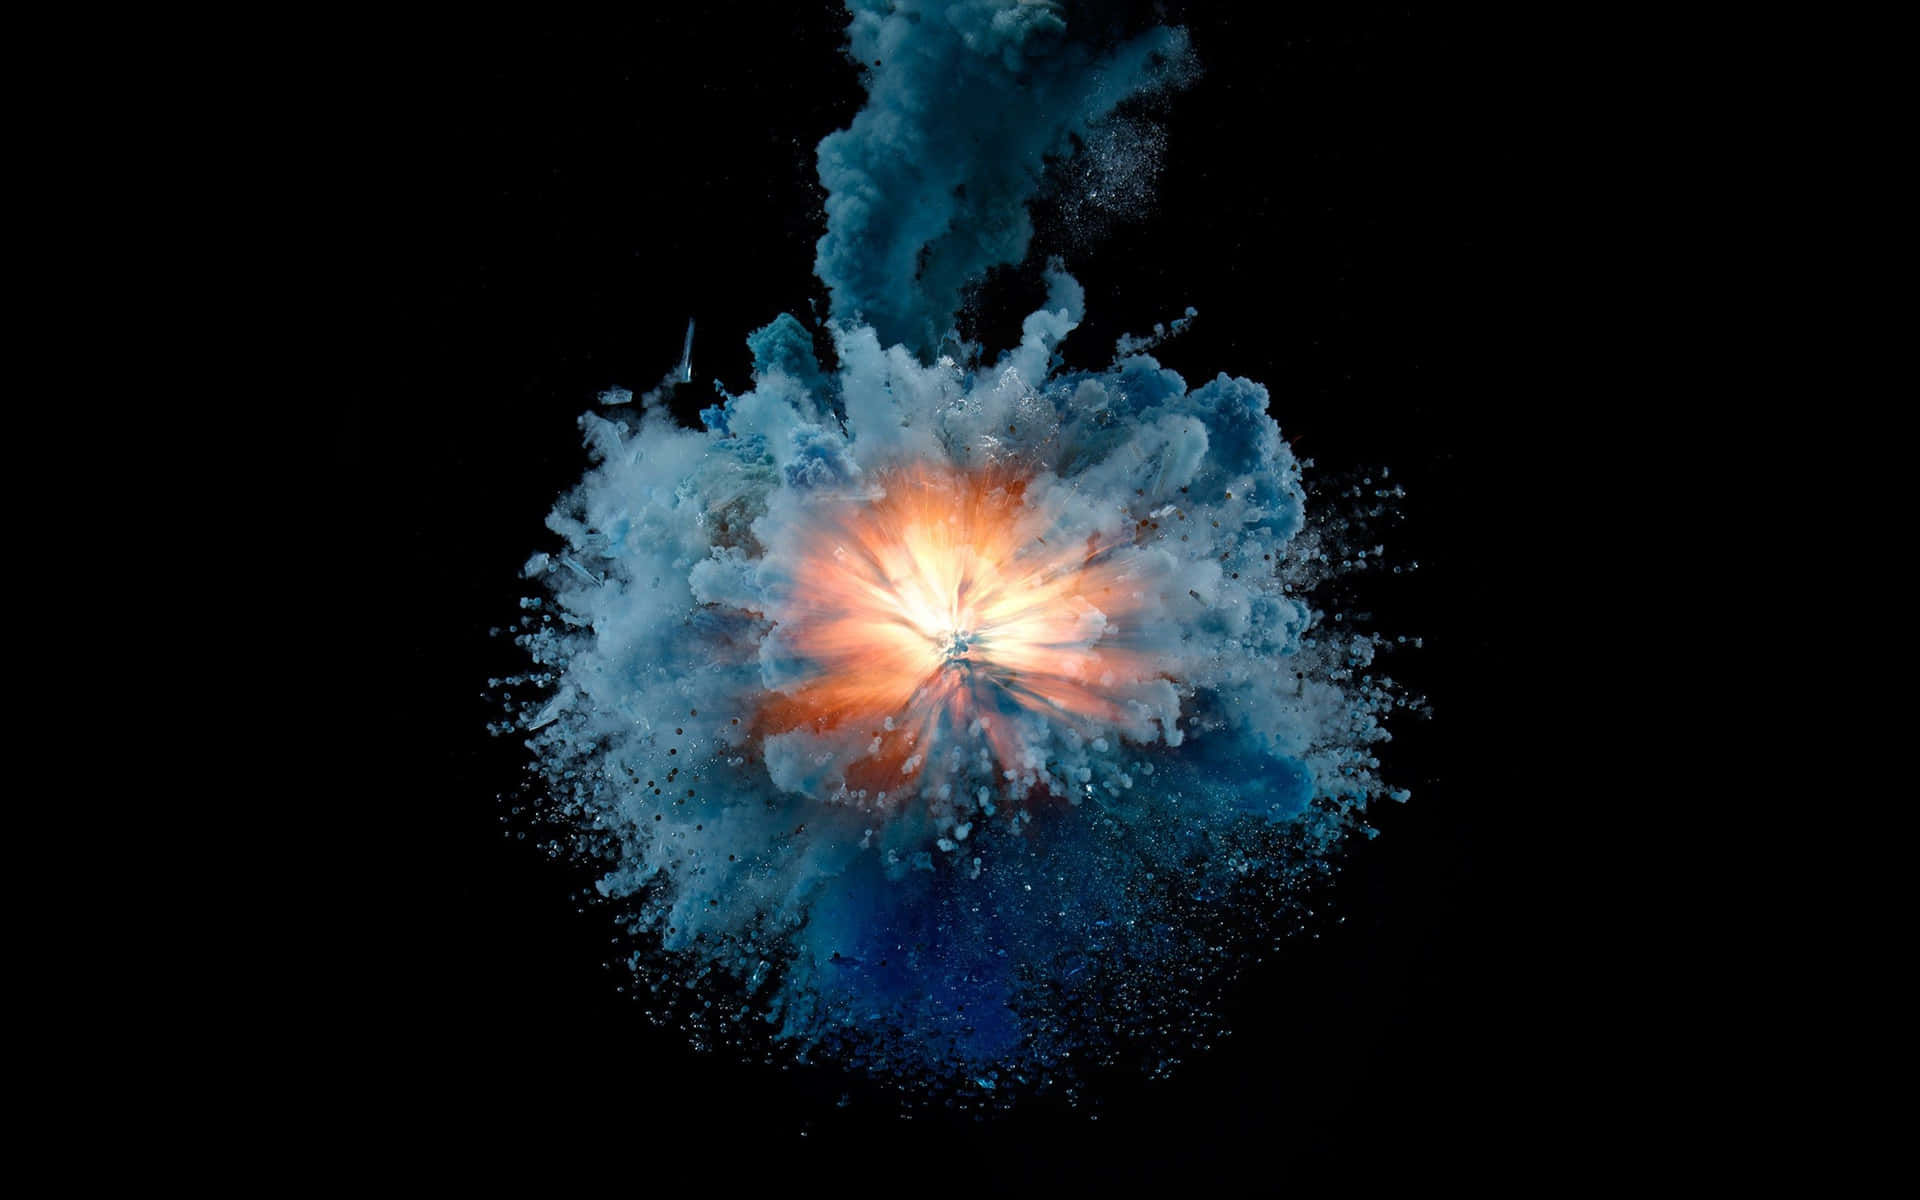 Powdered Object Exploding Oled Monitor Wallpaper